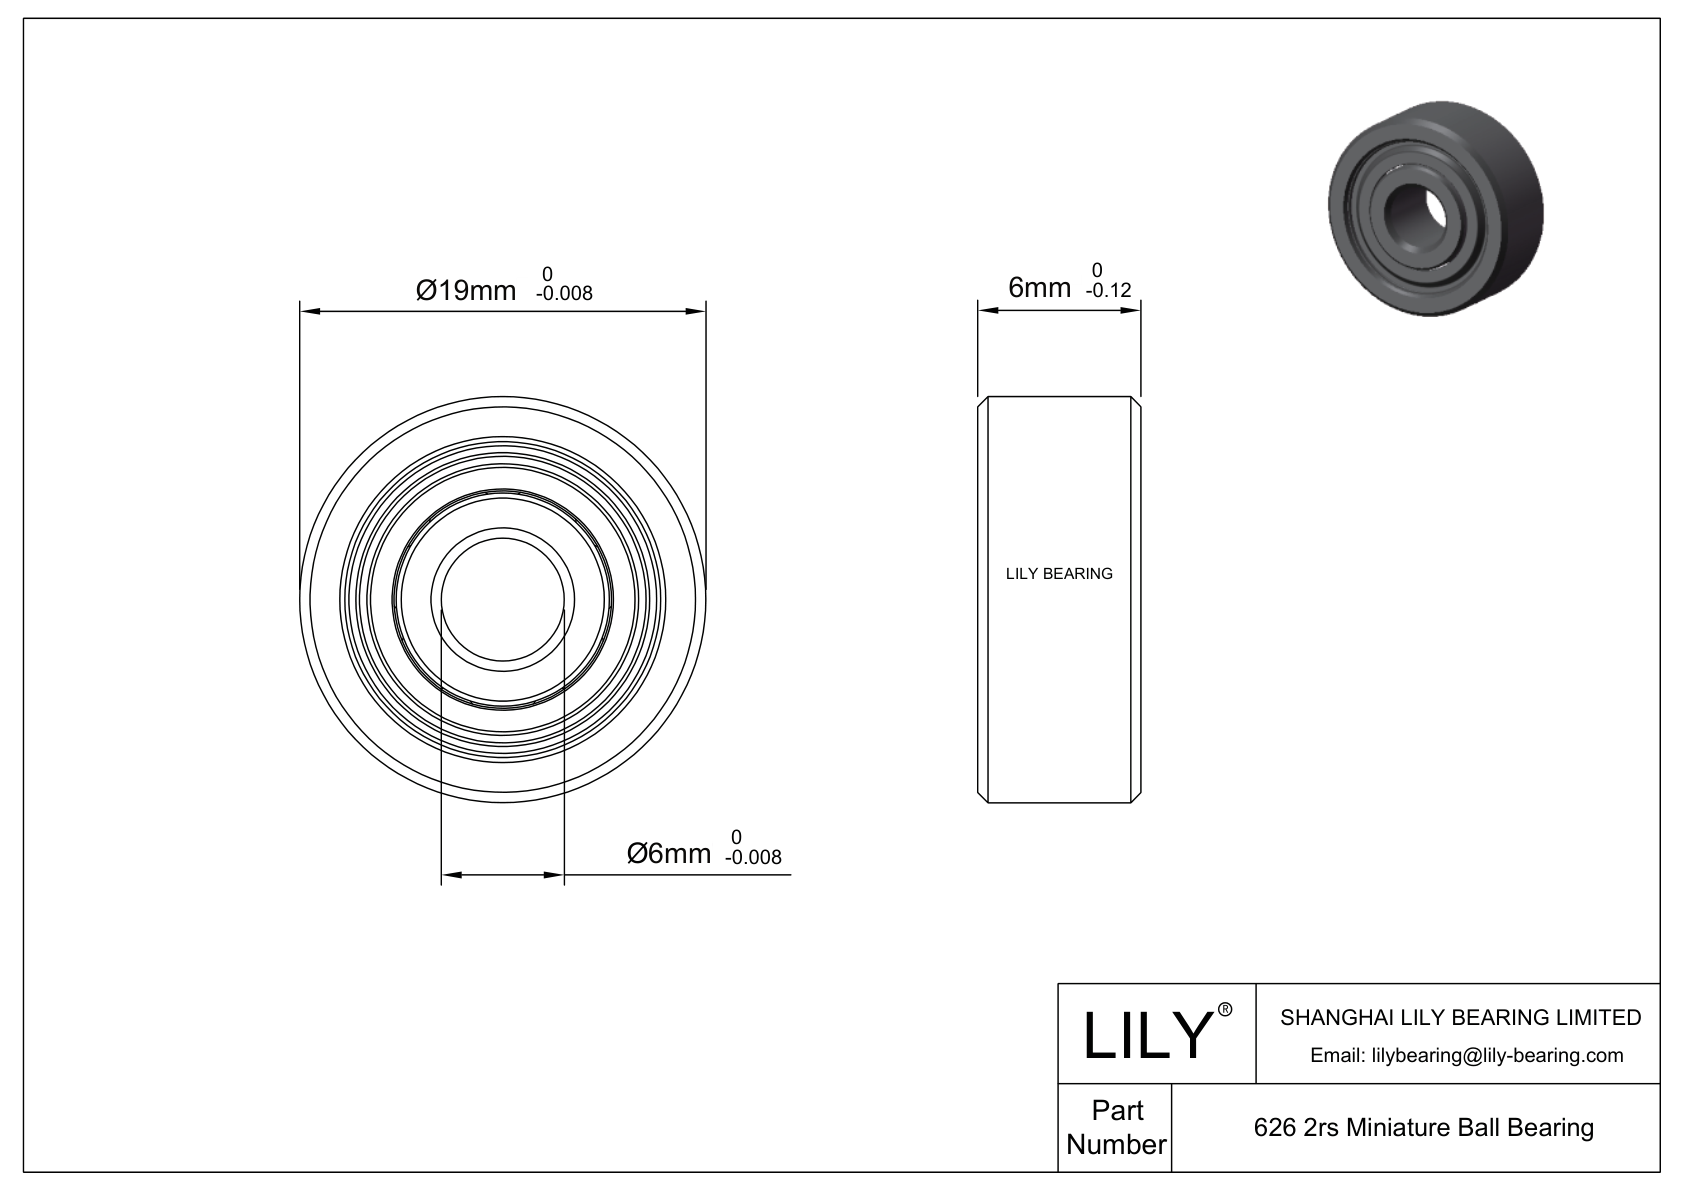 LILY-PUT62630-45C1L9M5 Outsourcing Polyurethane Coated Bearing With Screw cad drawing